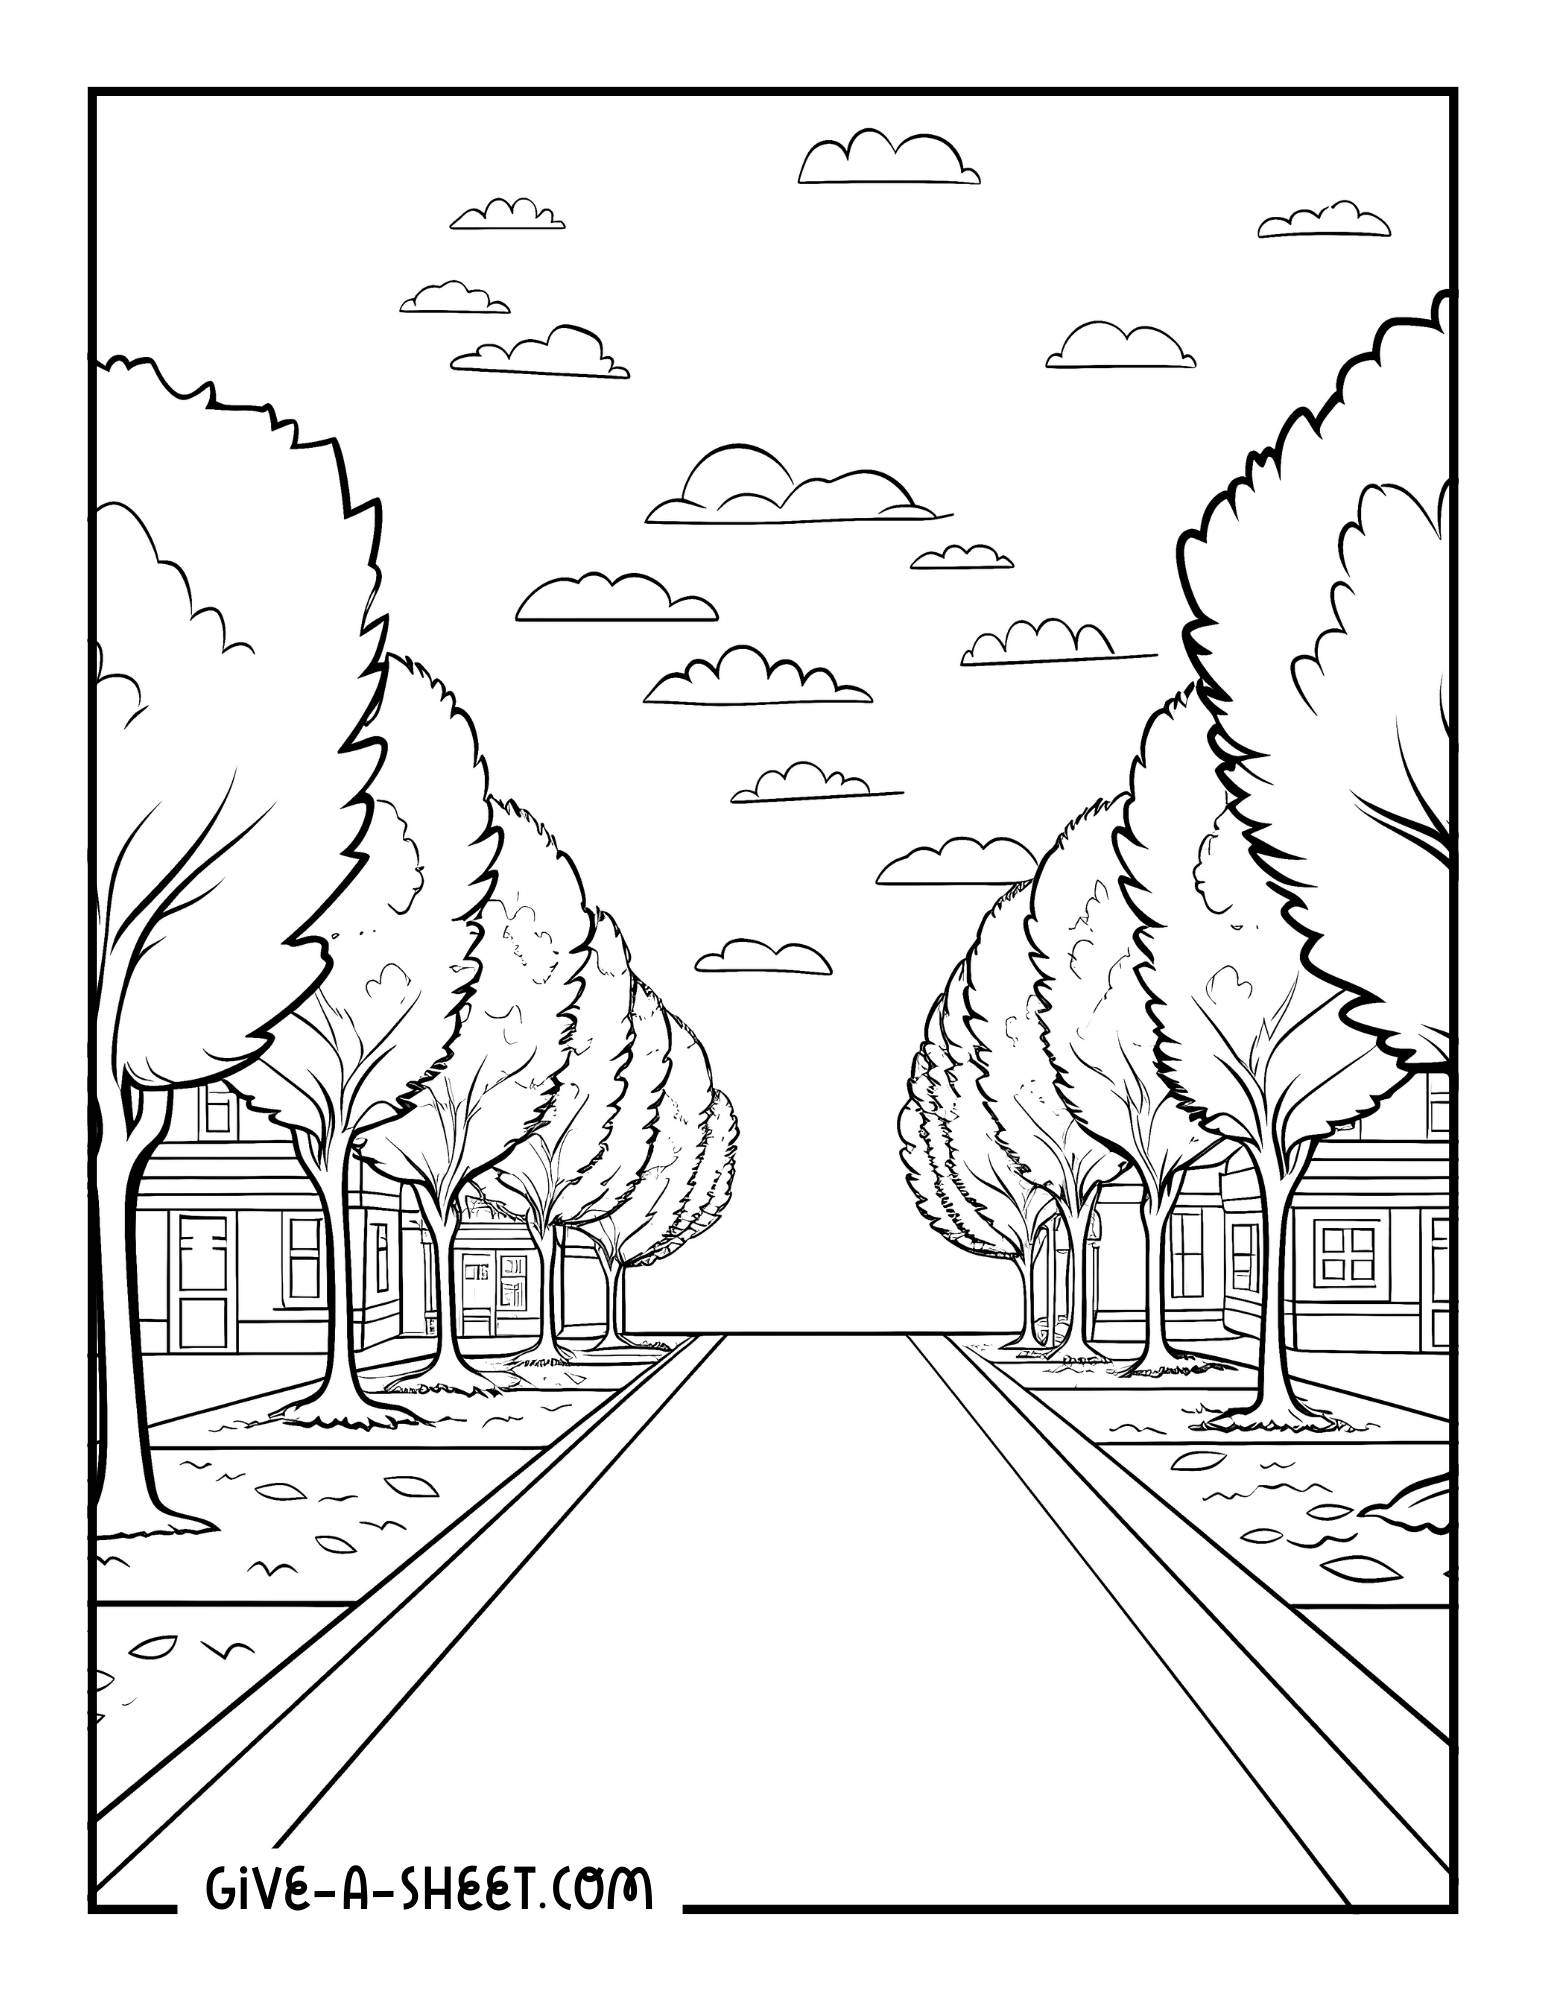 Tree lined street appreciation free printables to color.